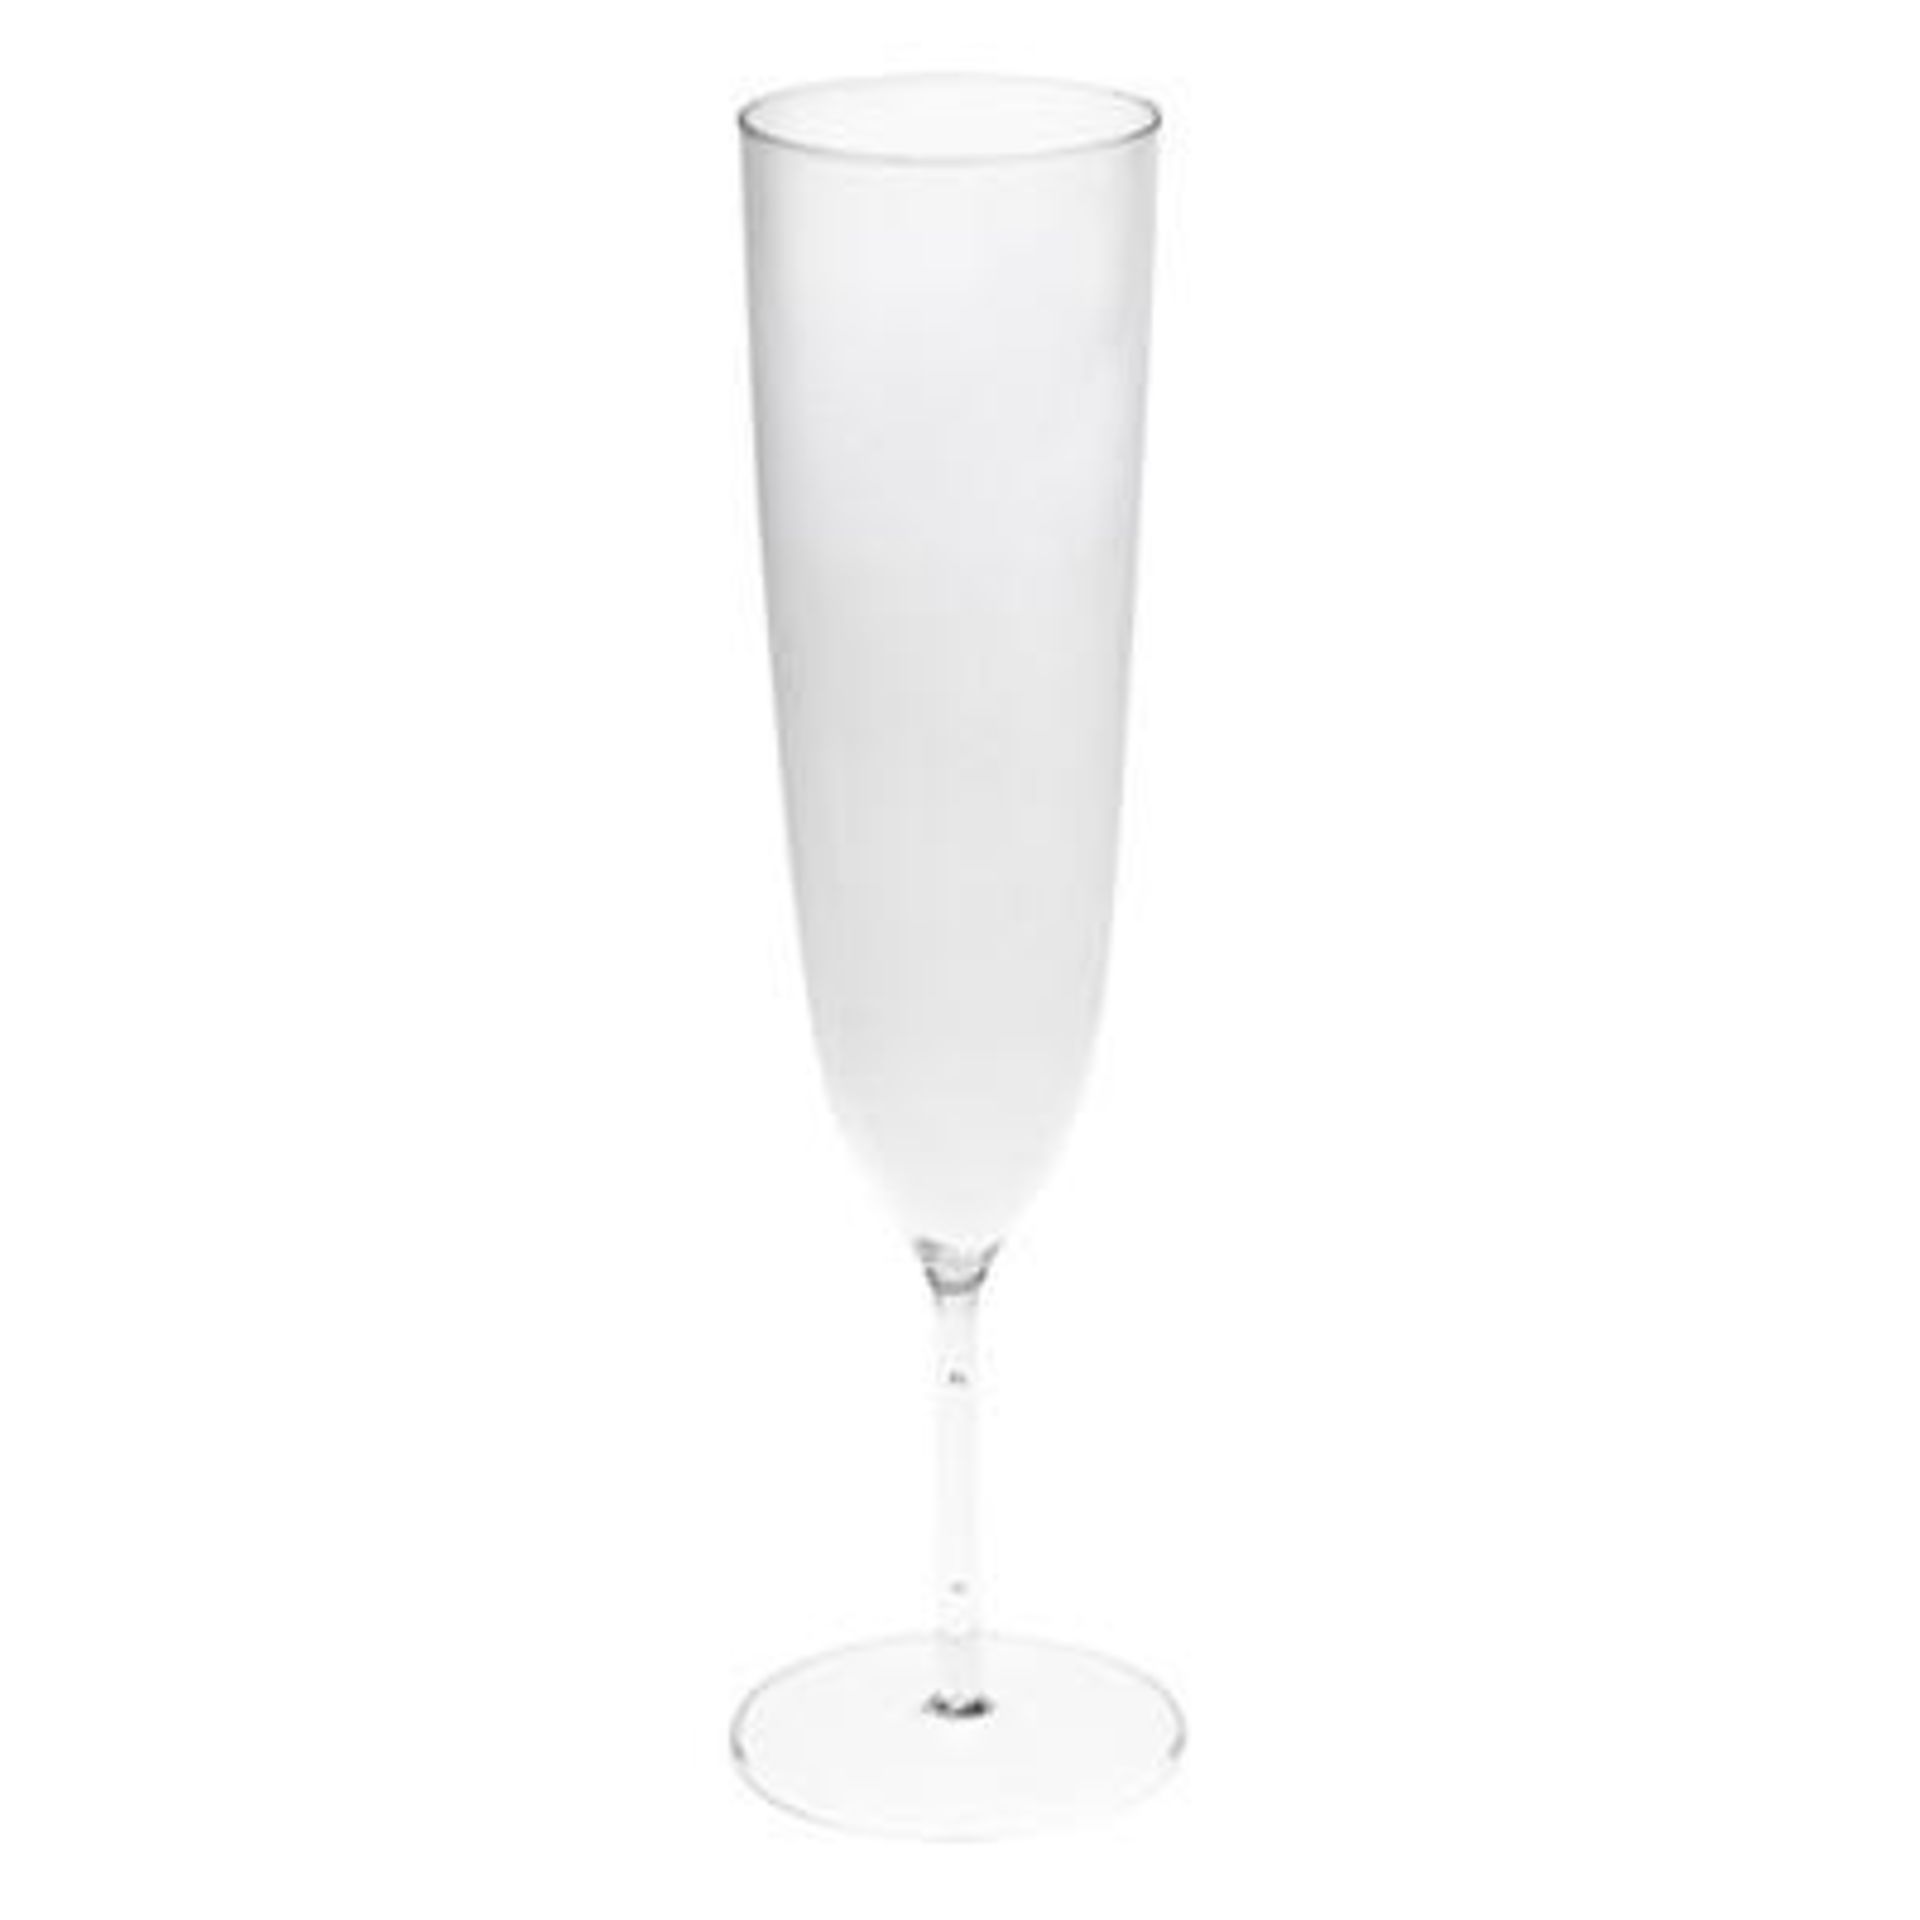 1,000 x Disposable Clear Plastic Champagne Flutes (170ml) - Brand: Remmerco CG111P - Brand New - Image 3 of 4